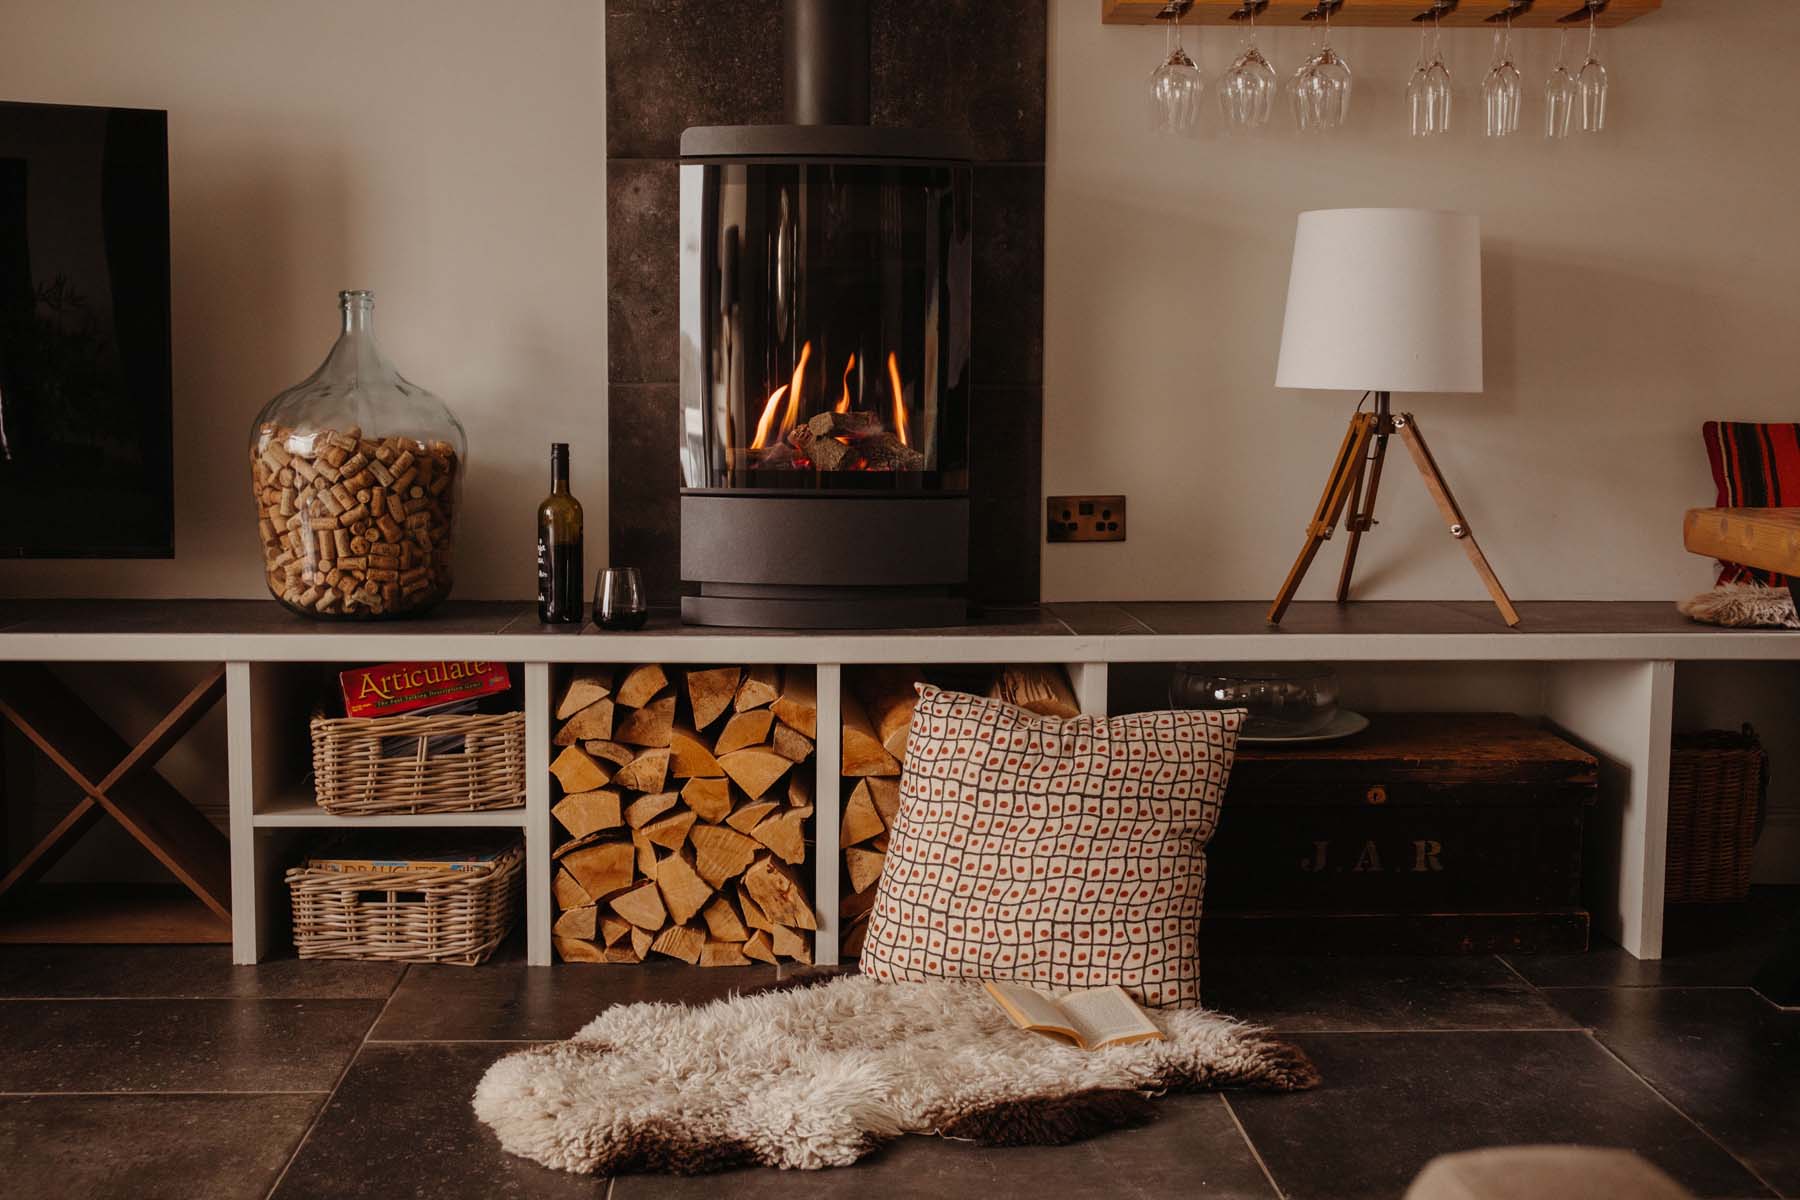 Modern wood burning stove with logs in a cubby hole